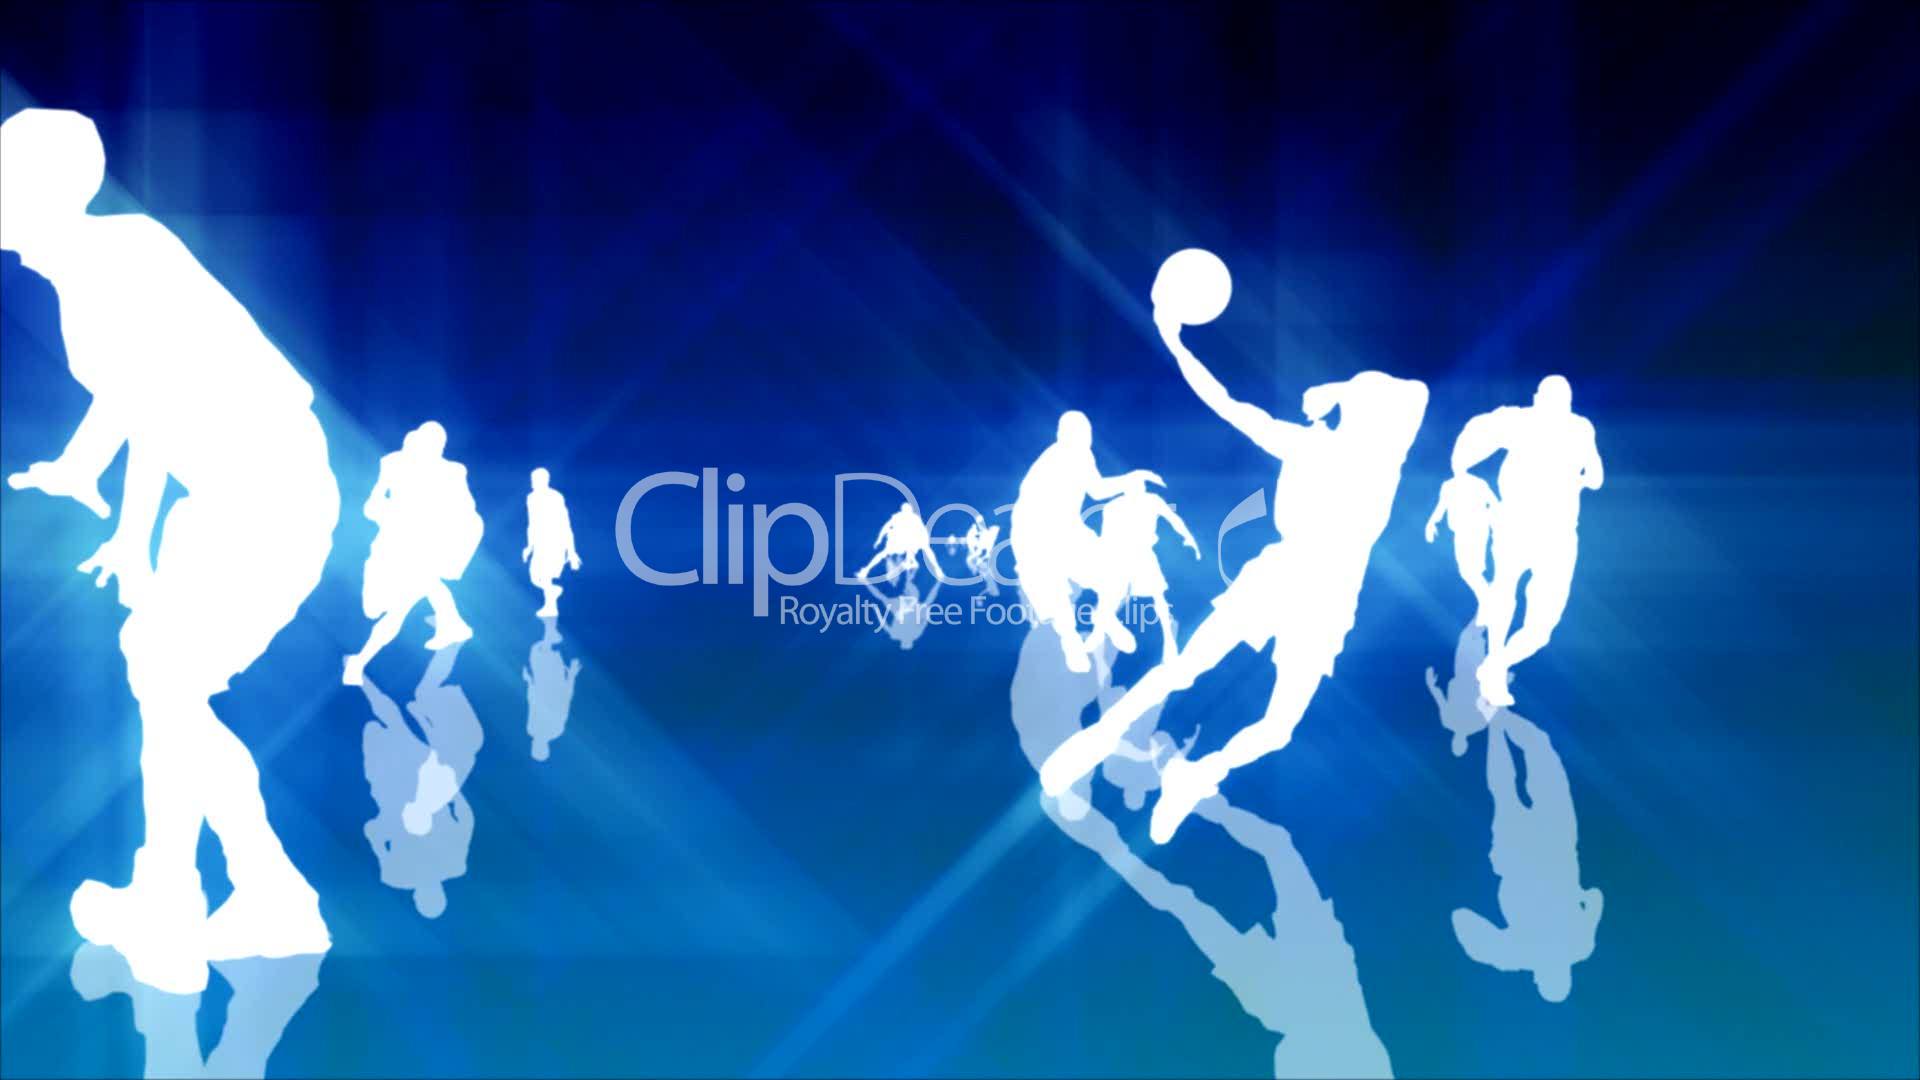 Basketball Animation 2: Royalty-free video and stock footage